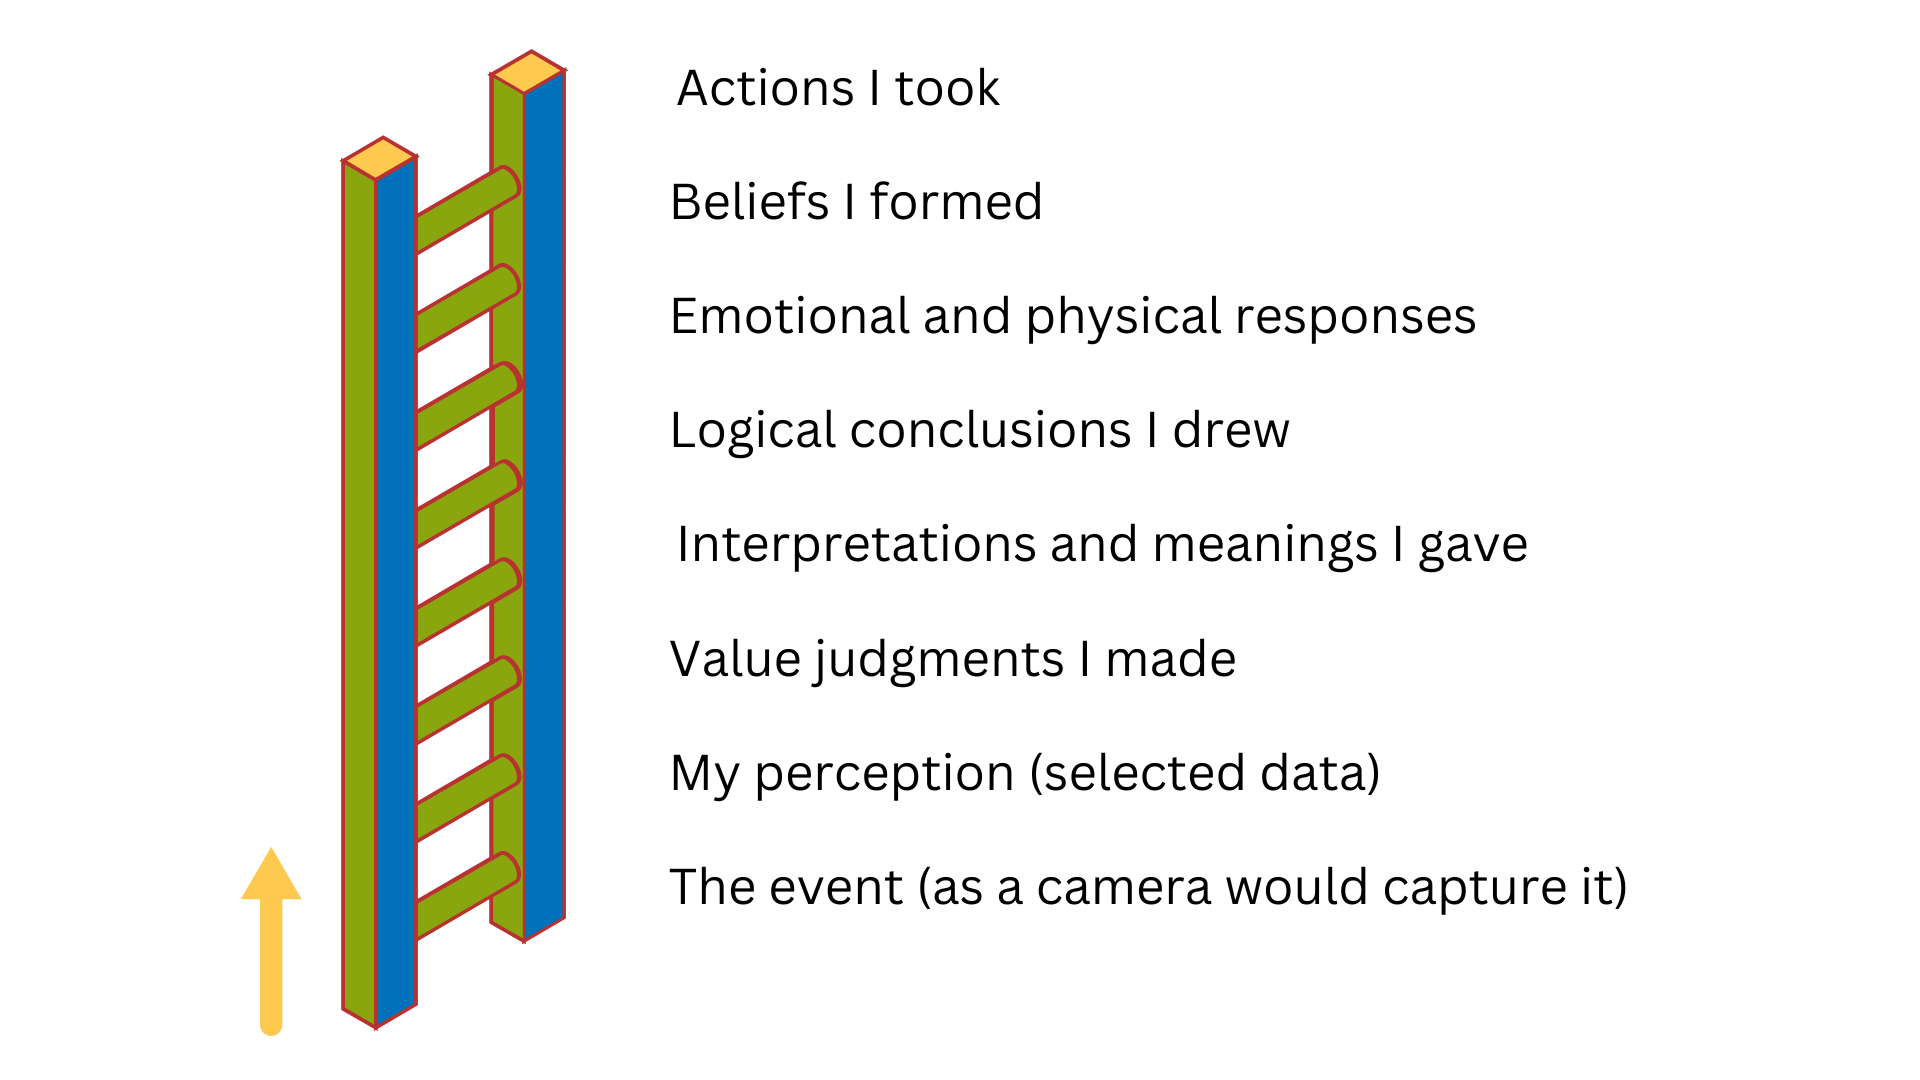 A ladder depicts how we go from experiencing an event to forming perceptions and beliefs around it. 